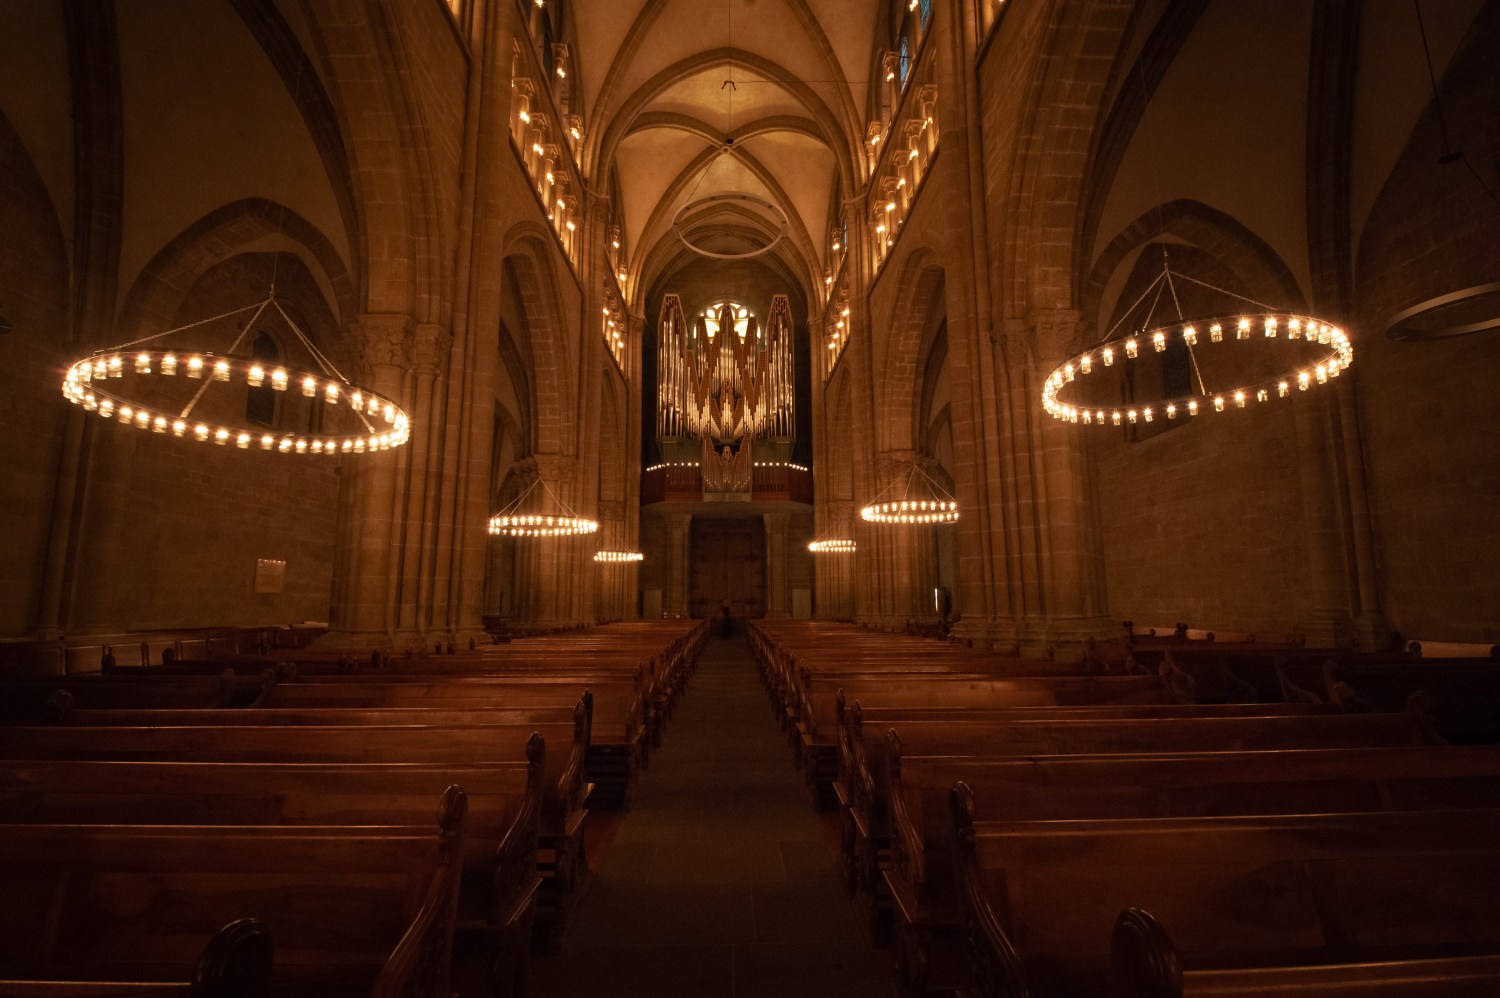 Candle-lit cathedral